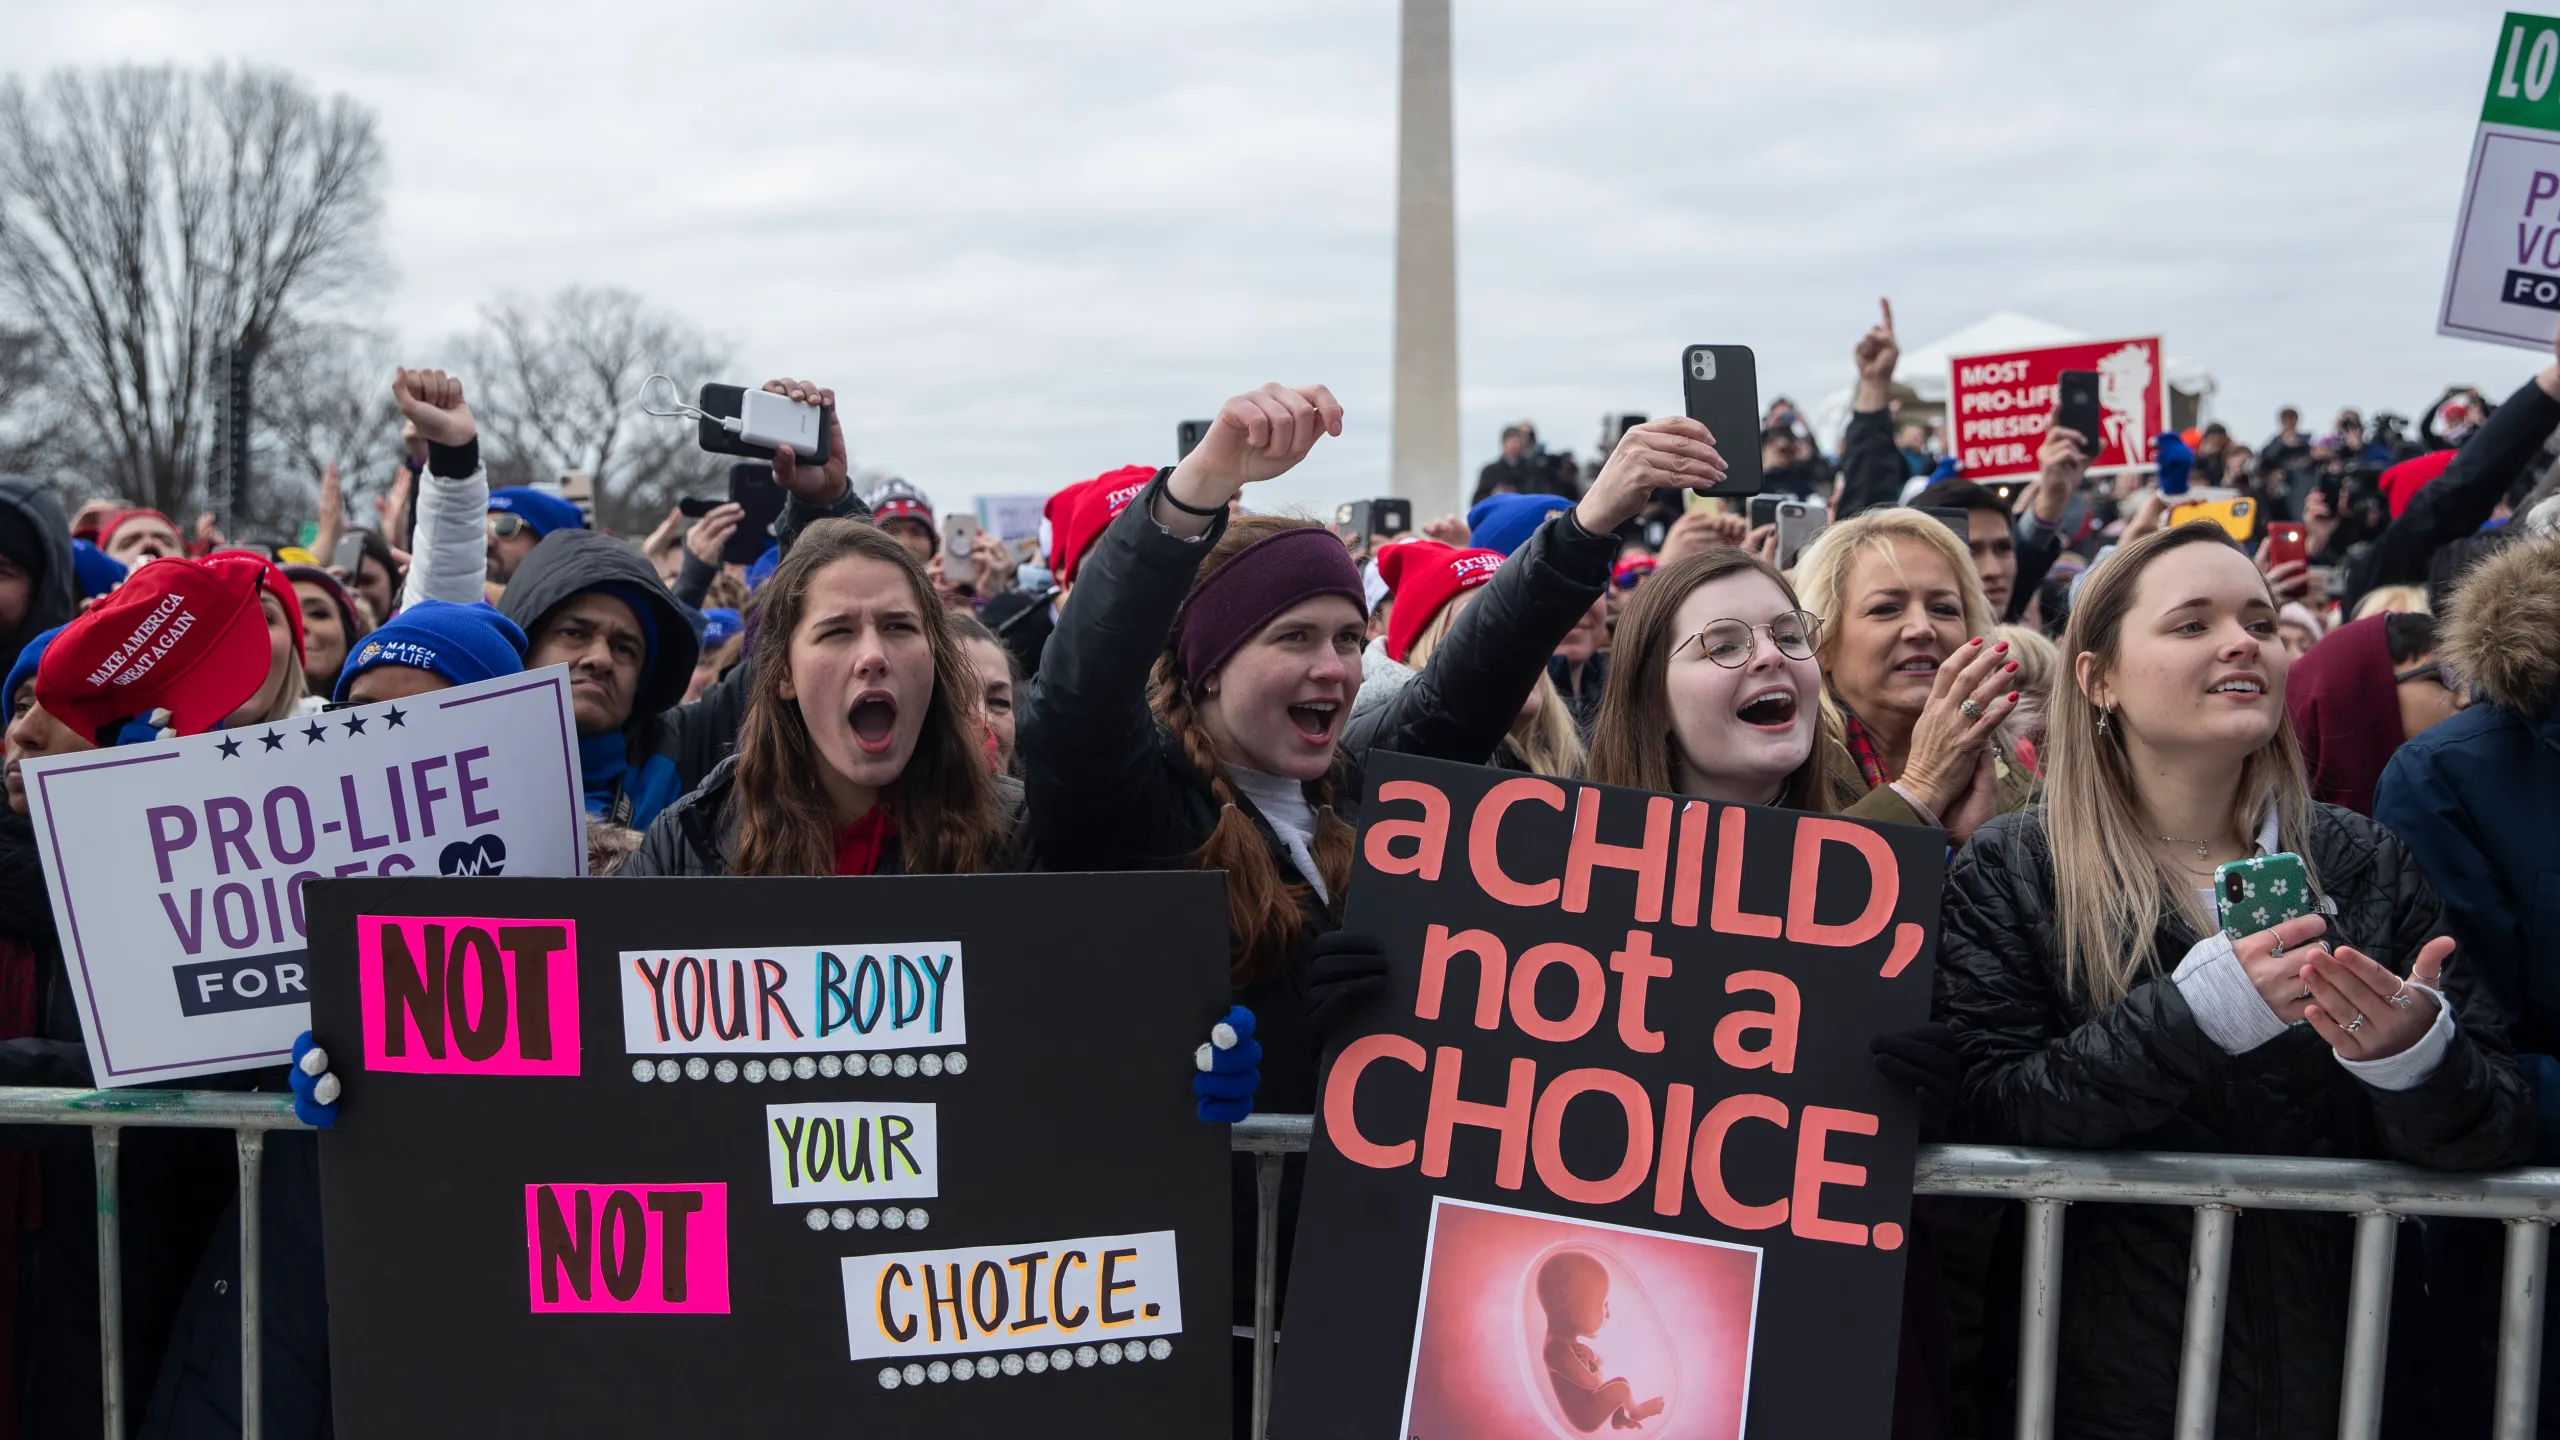 Democrats' reliance on abortion issue faces hurdles with Trump's stance (Credits: AP Photo)